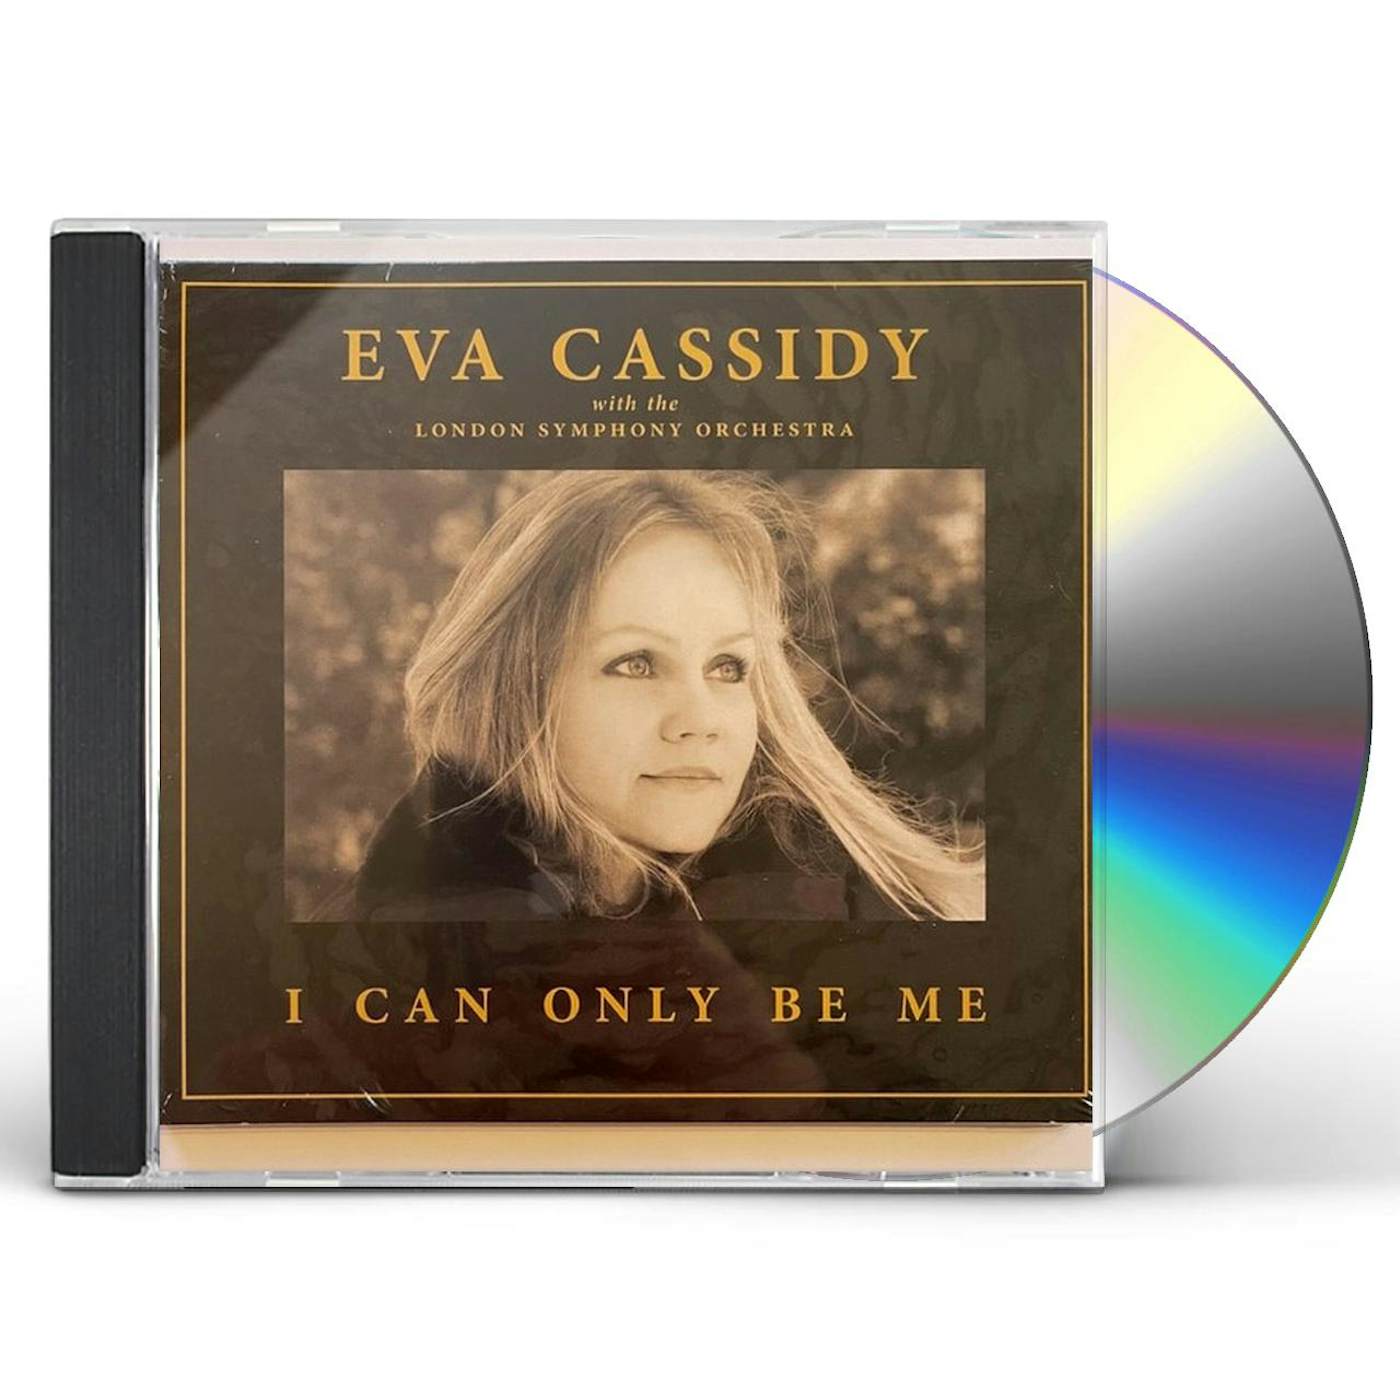 Eva Cassidy I CAN ONLY BE ME CD